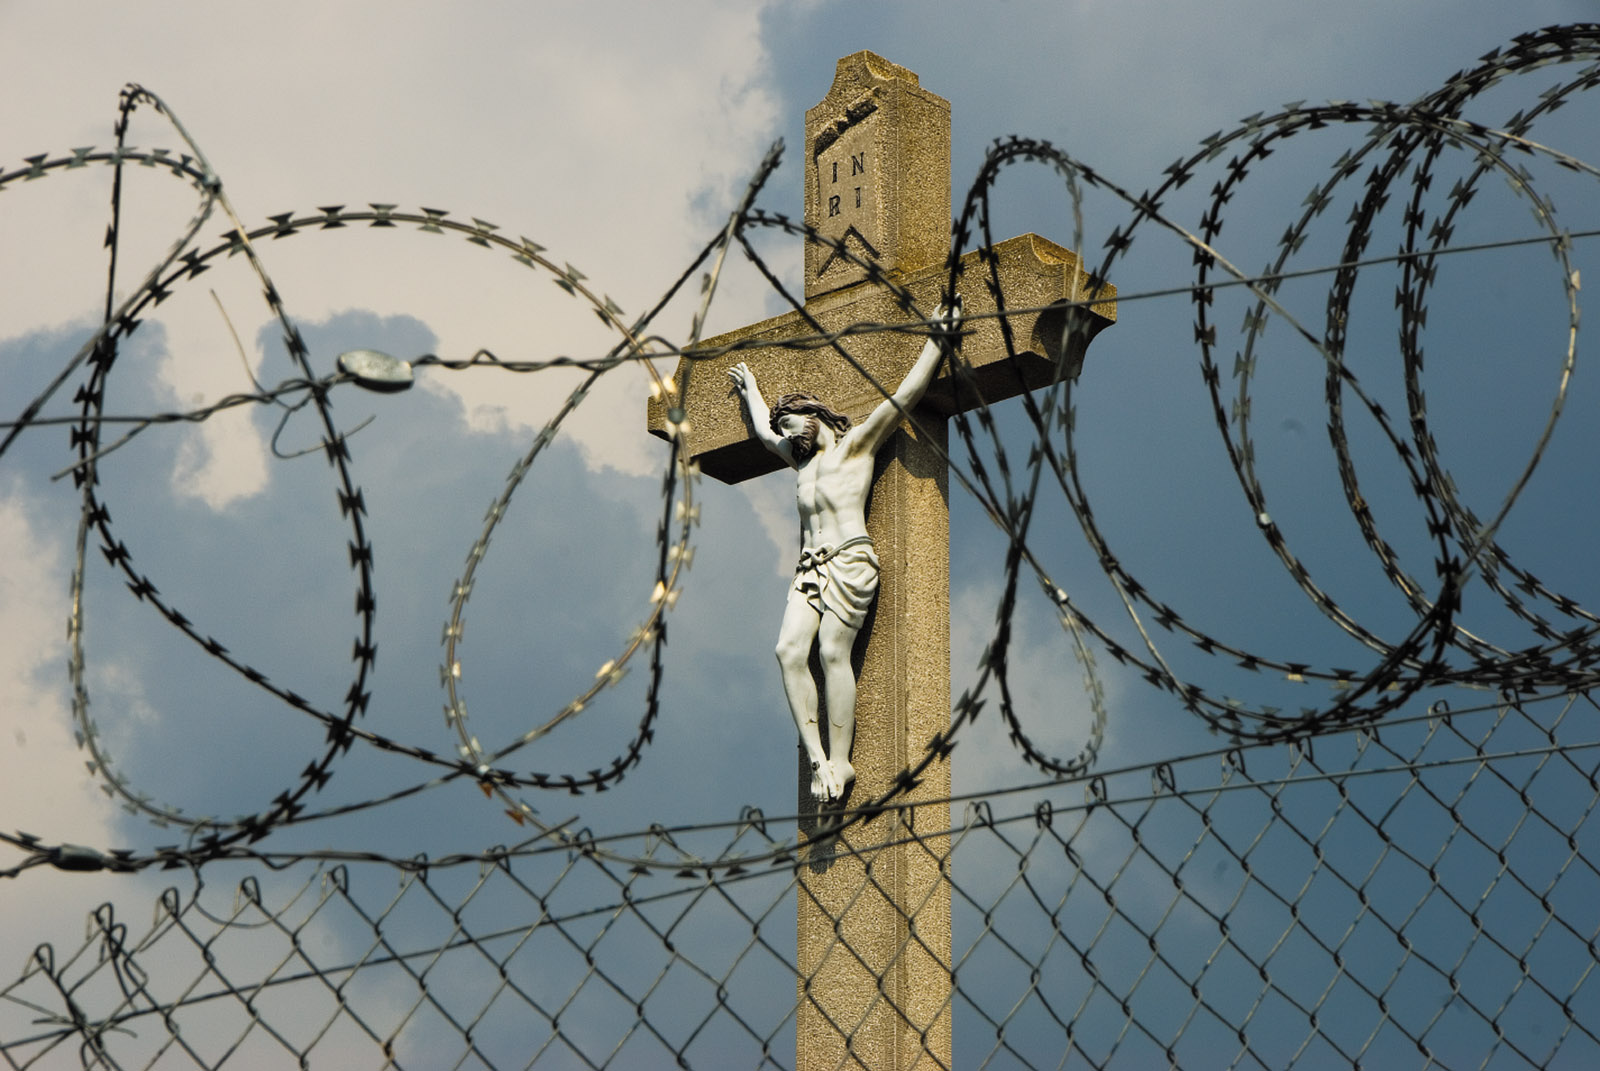 A Hungarian crucifix seen through the razor wire of the border fence, Rastina, Serbia, September 2016